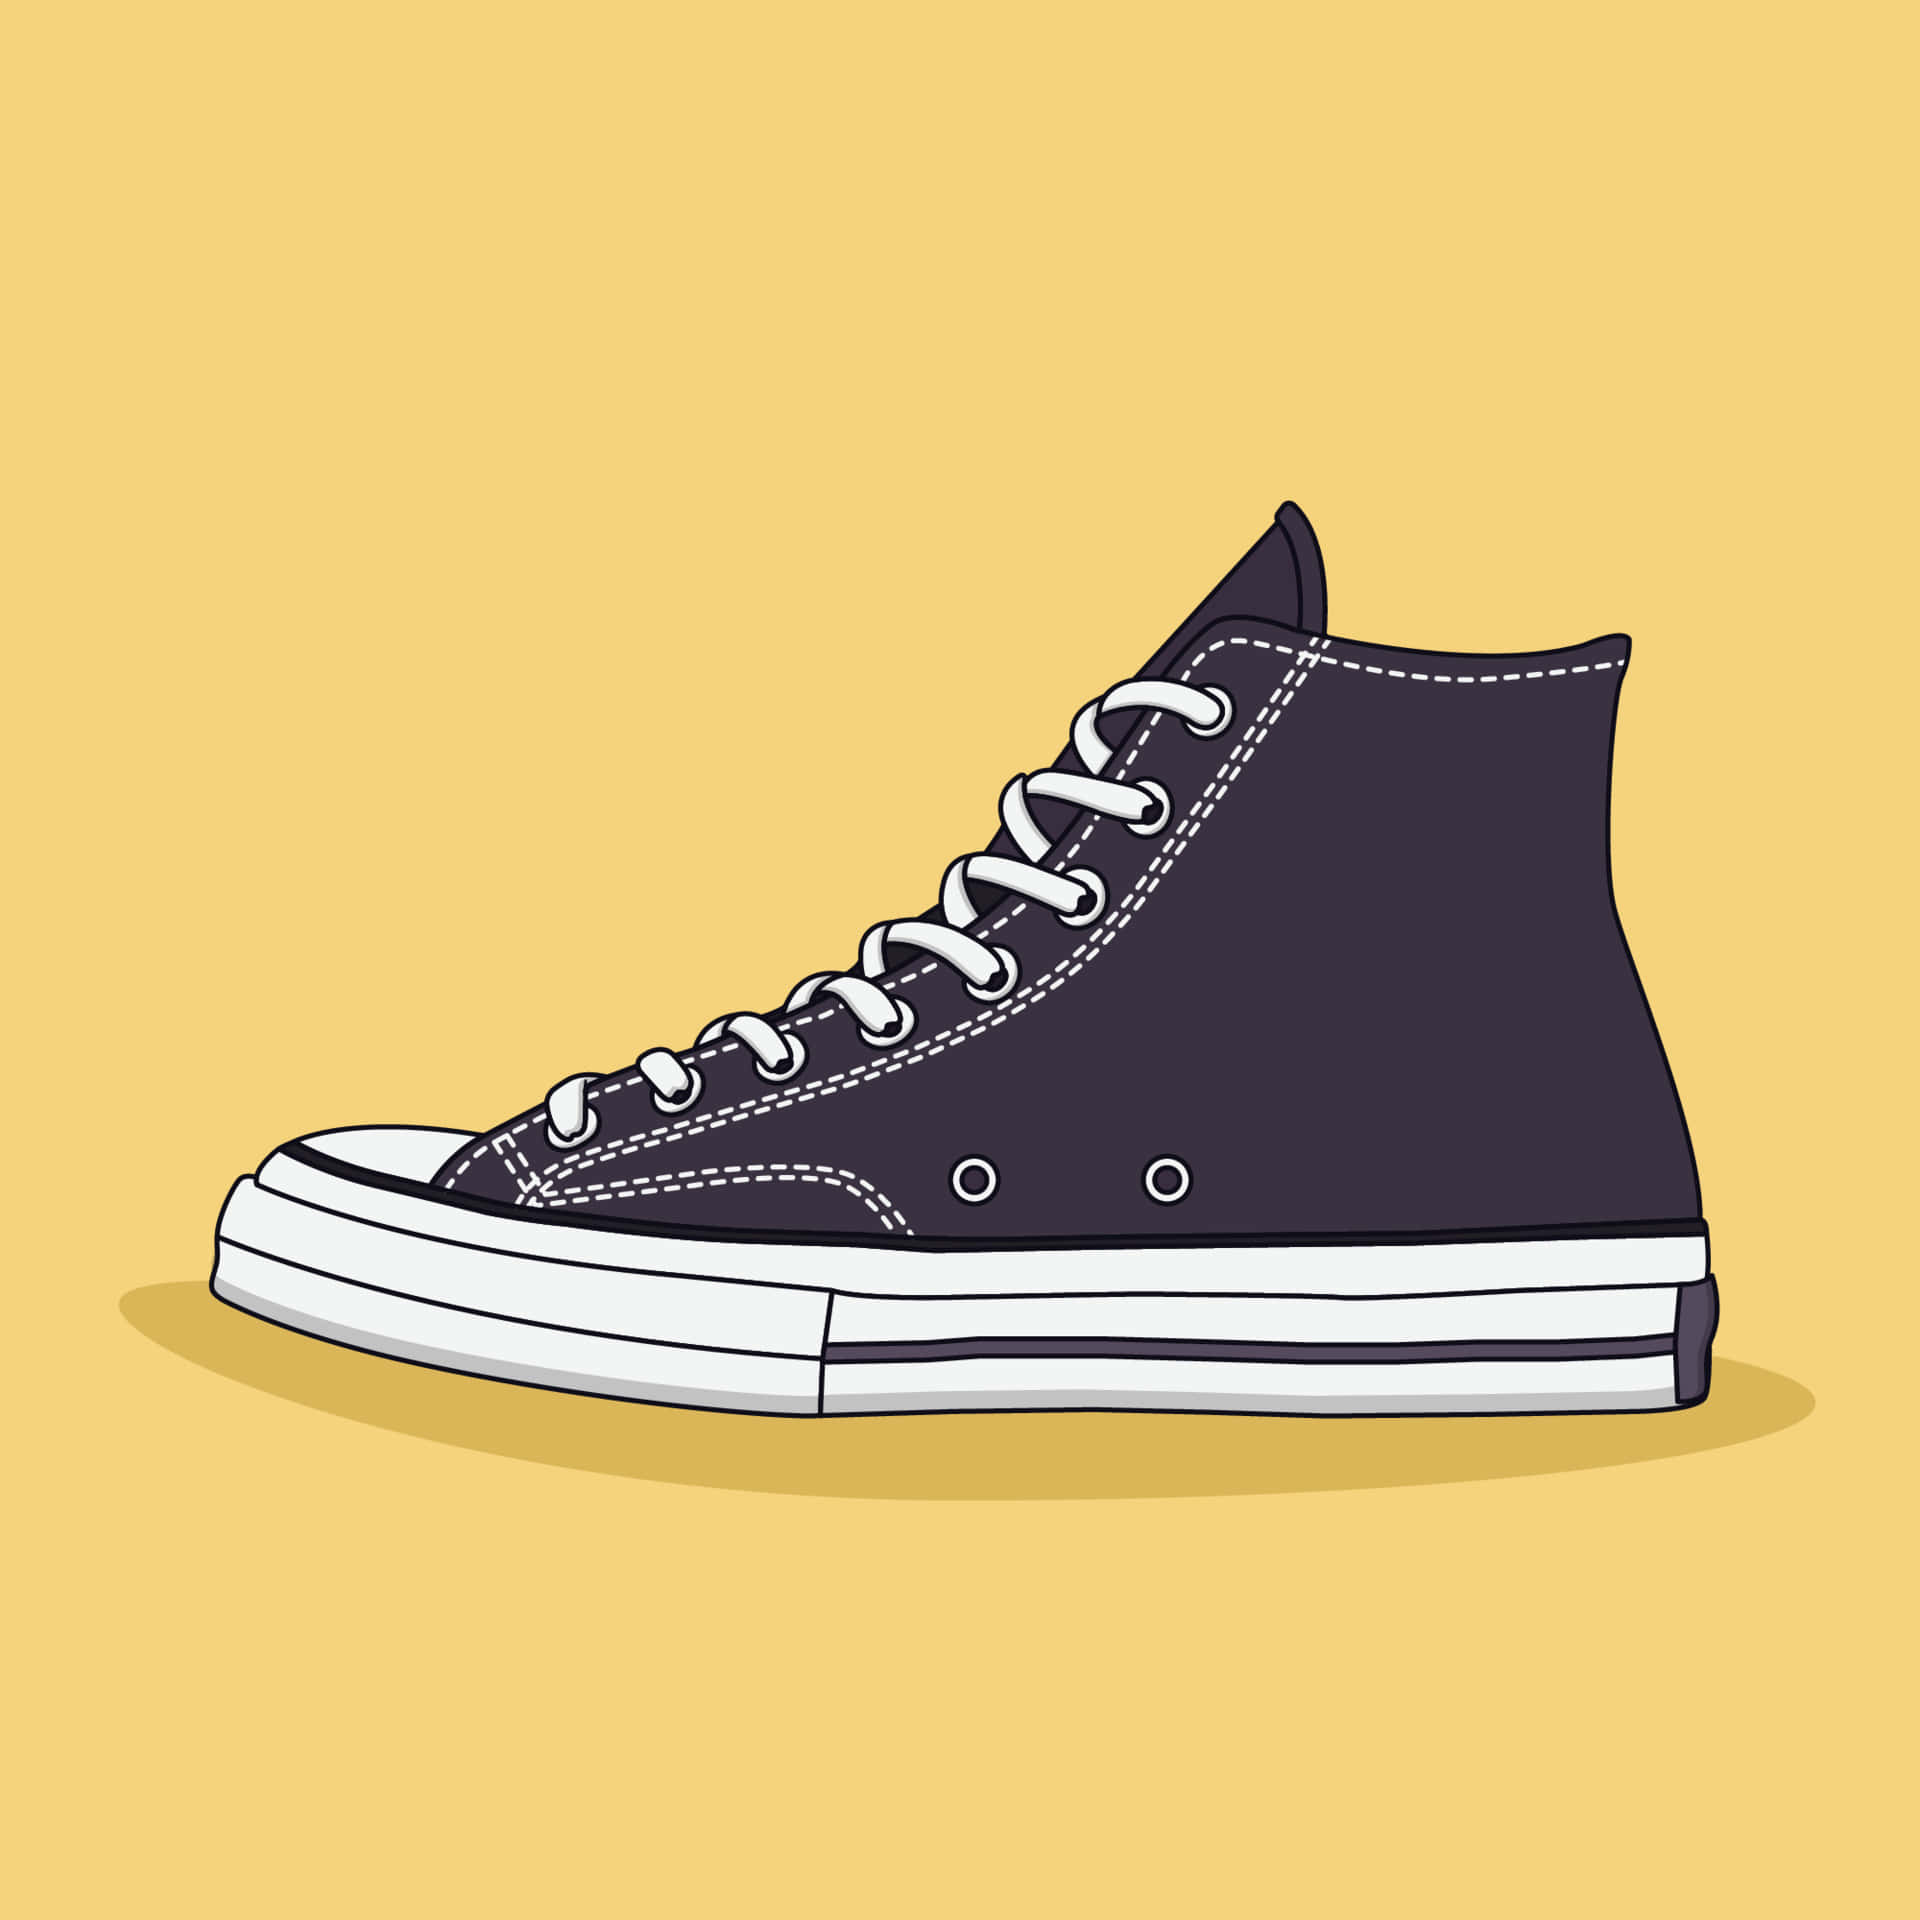 Trendy sneakers on vibrant background